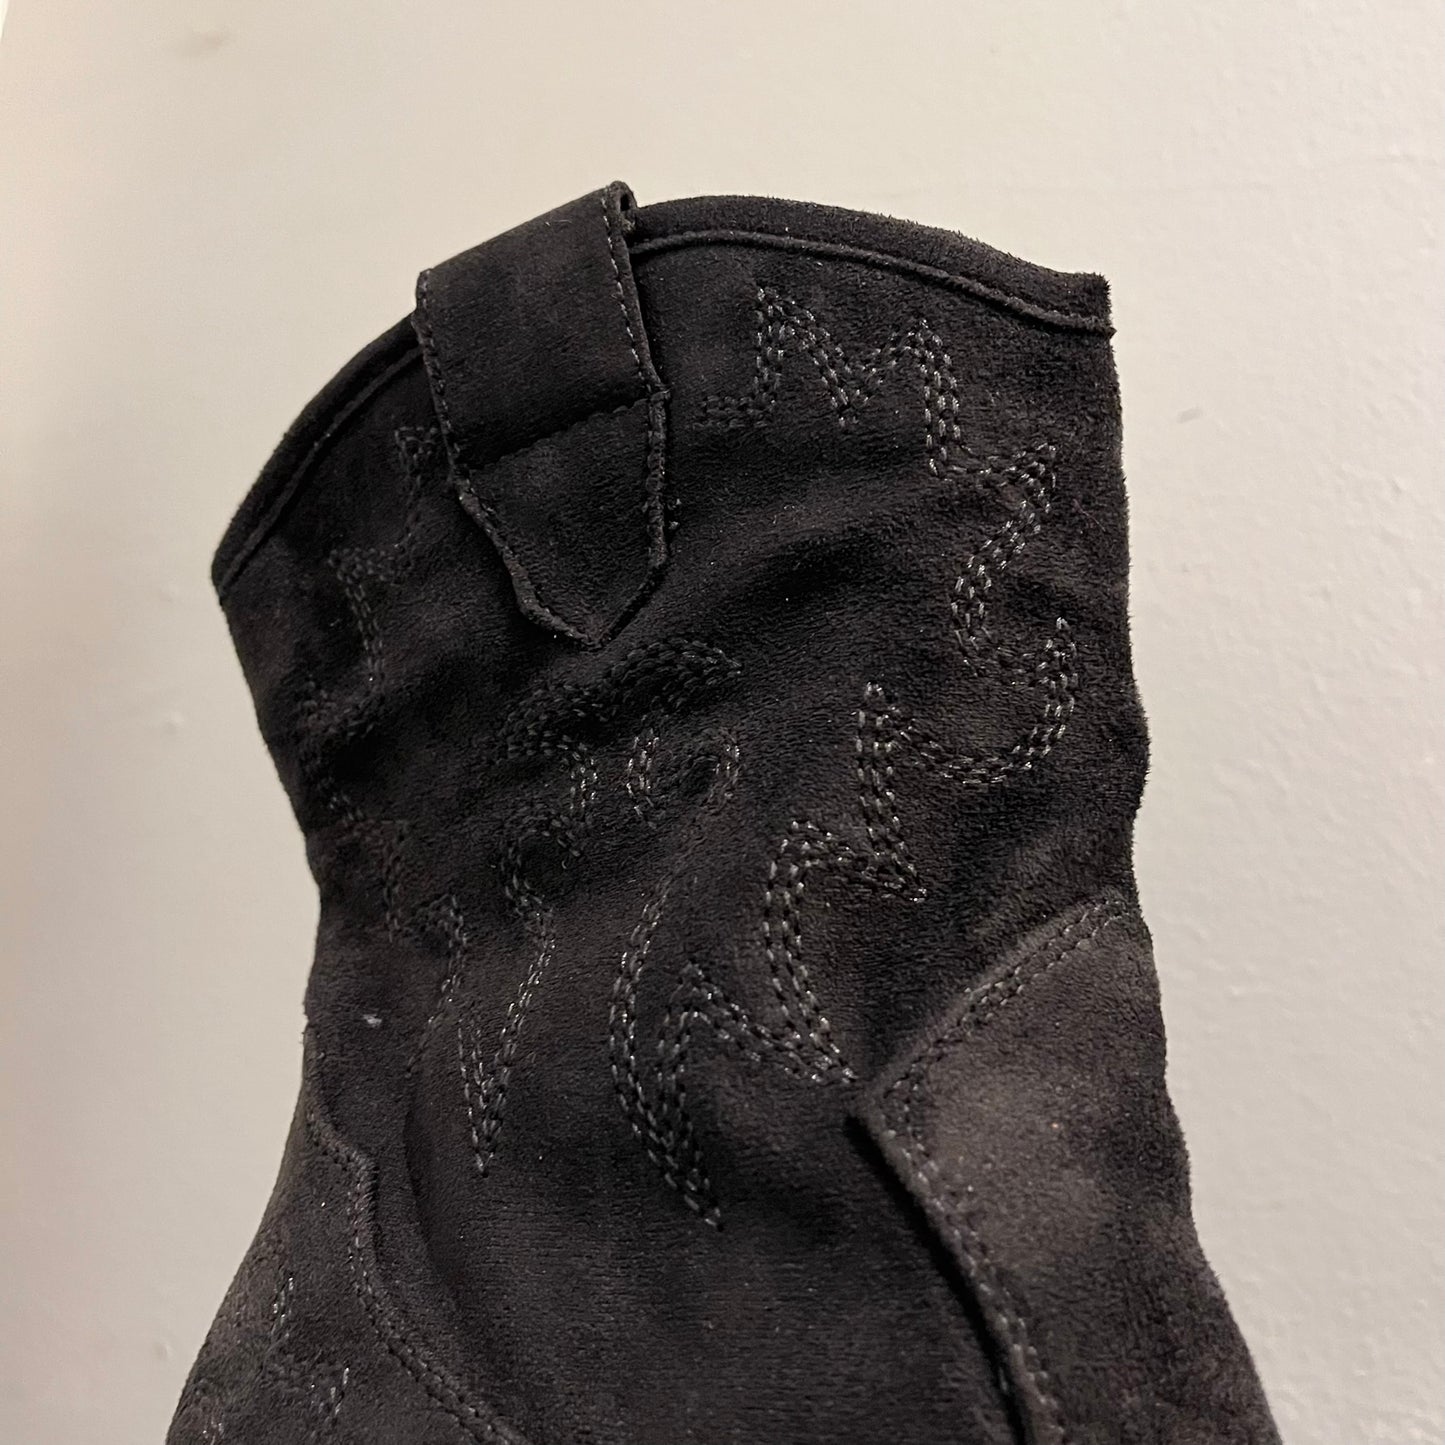 Western style boots - Black